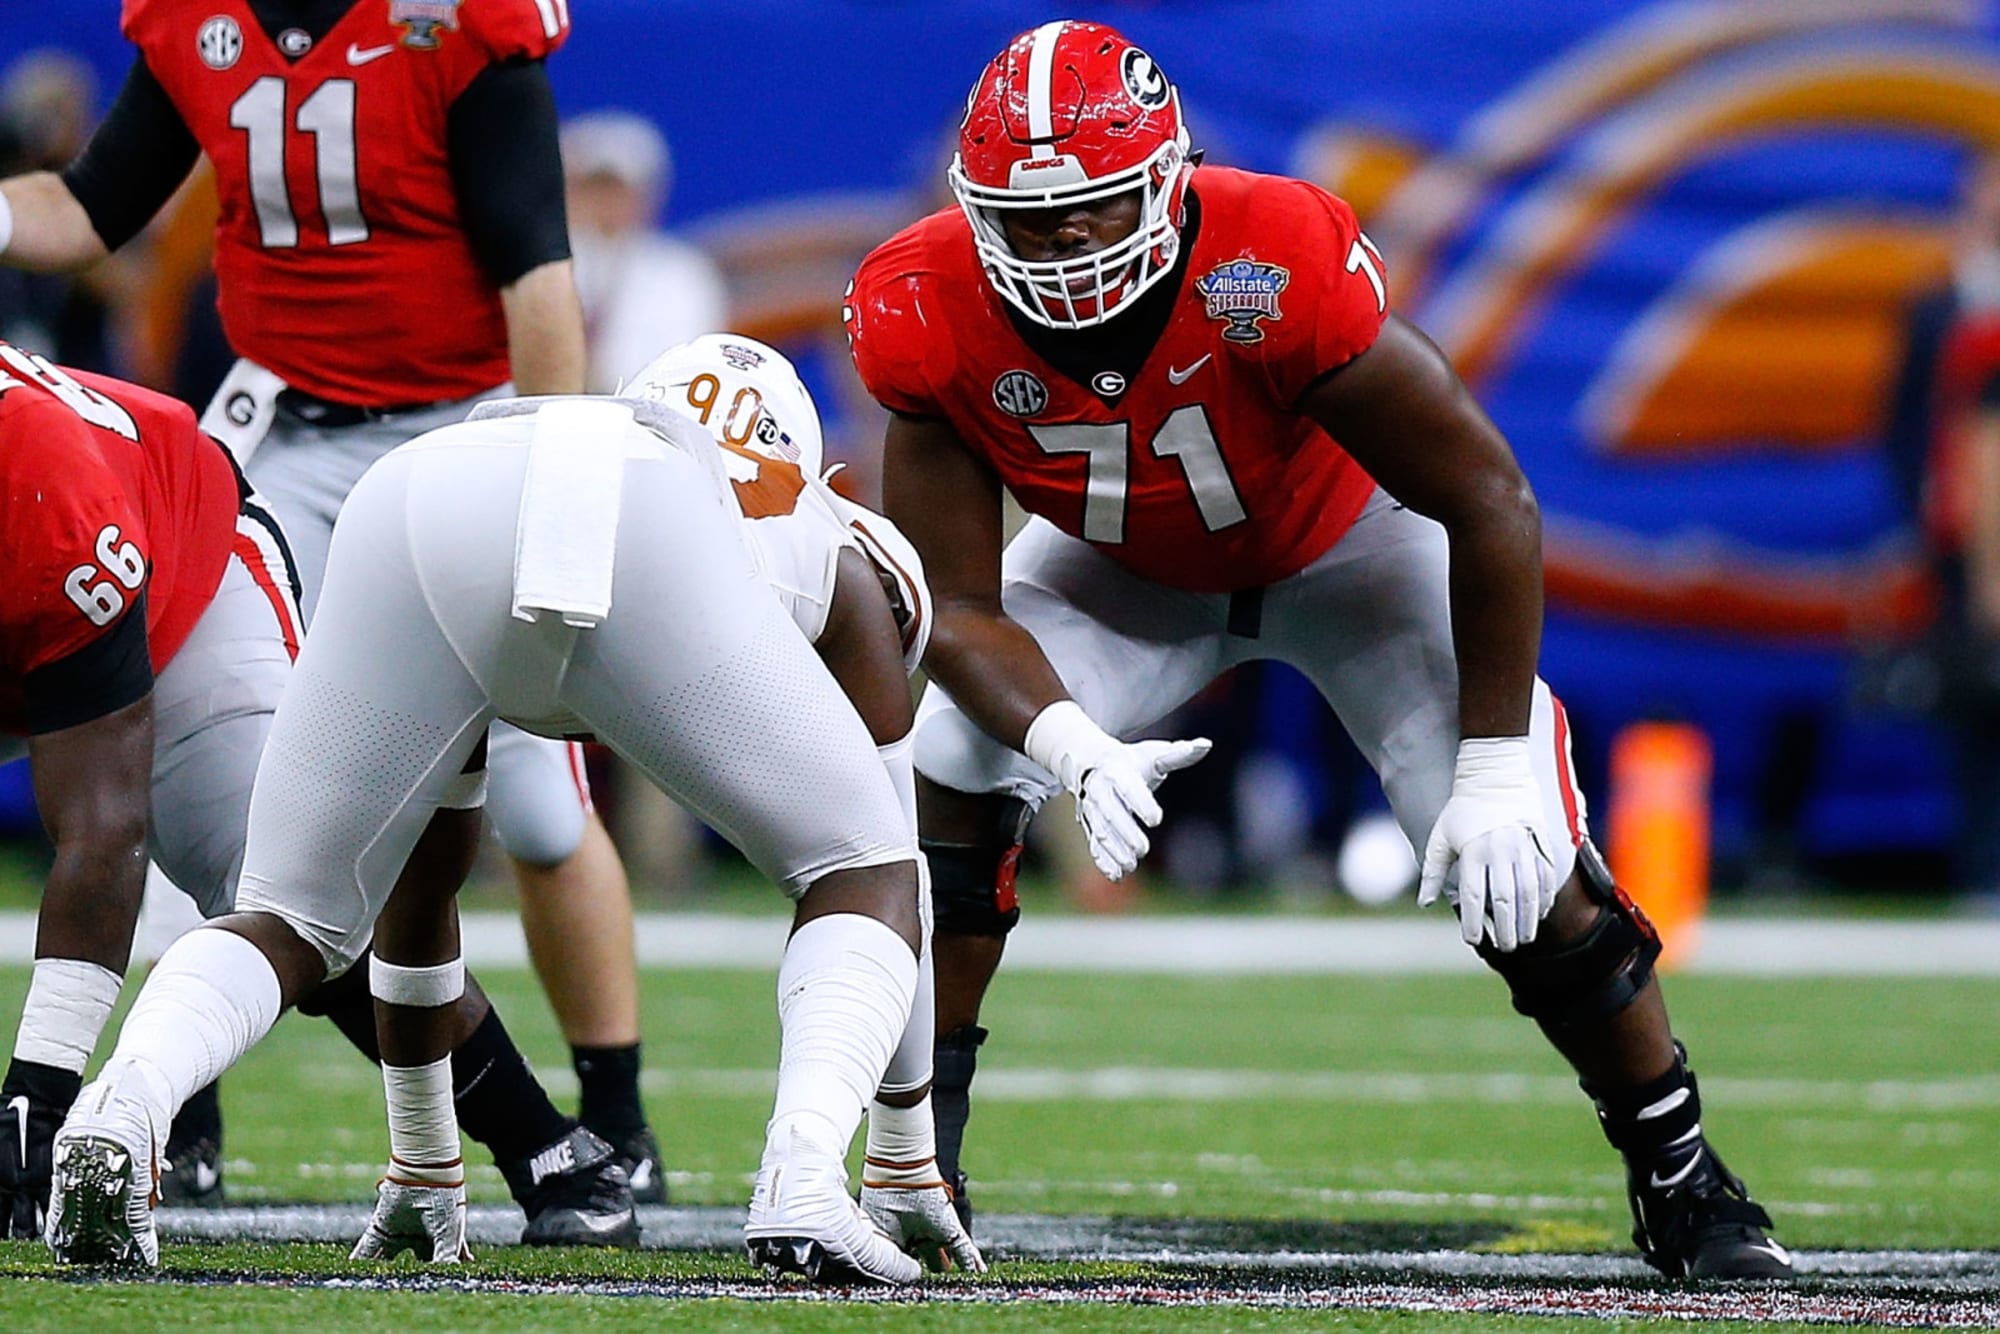 UGA football news Andrew Thomas drafted fourth overall by the New York